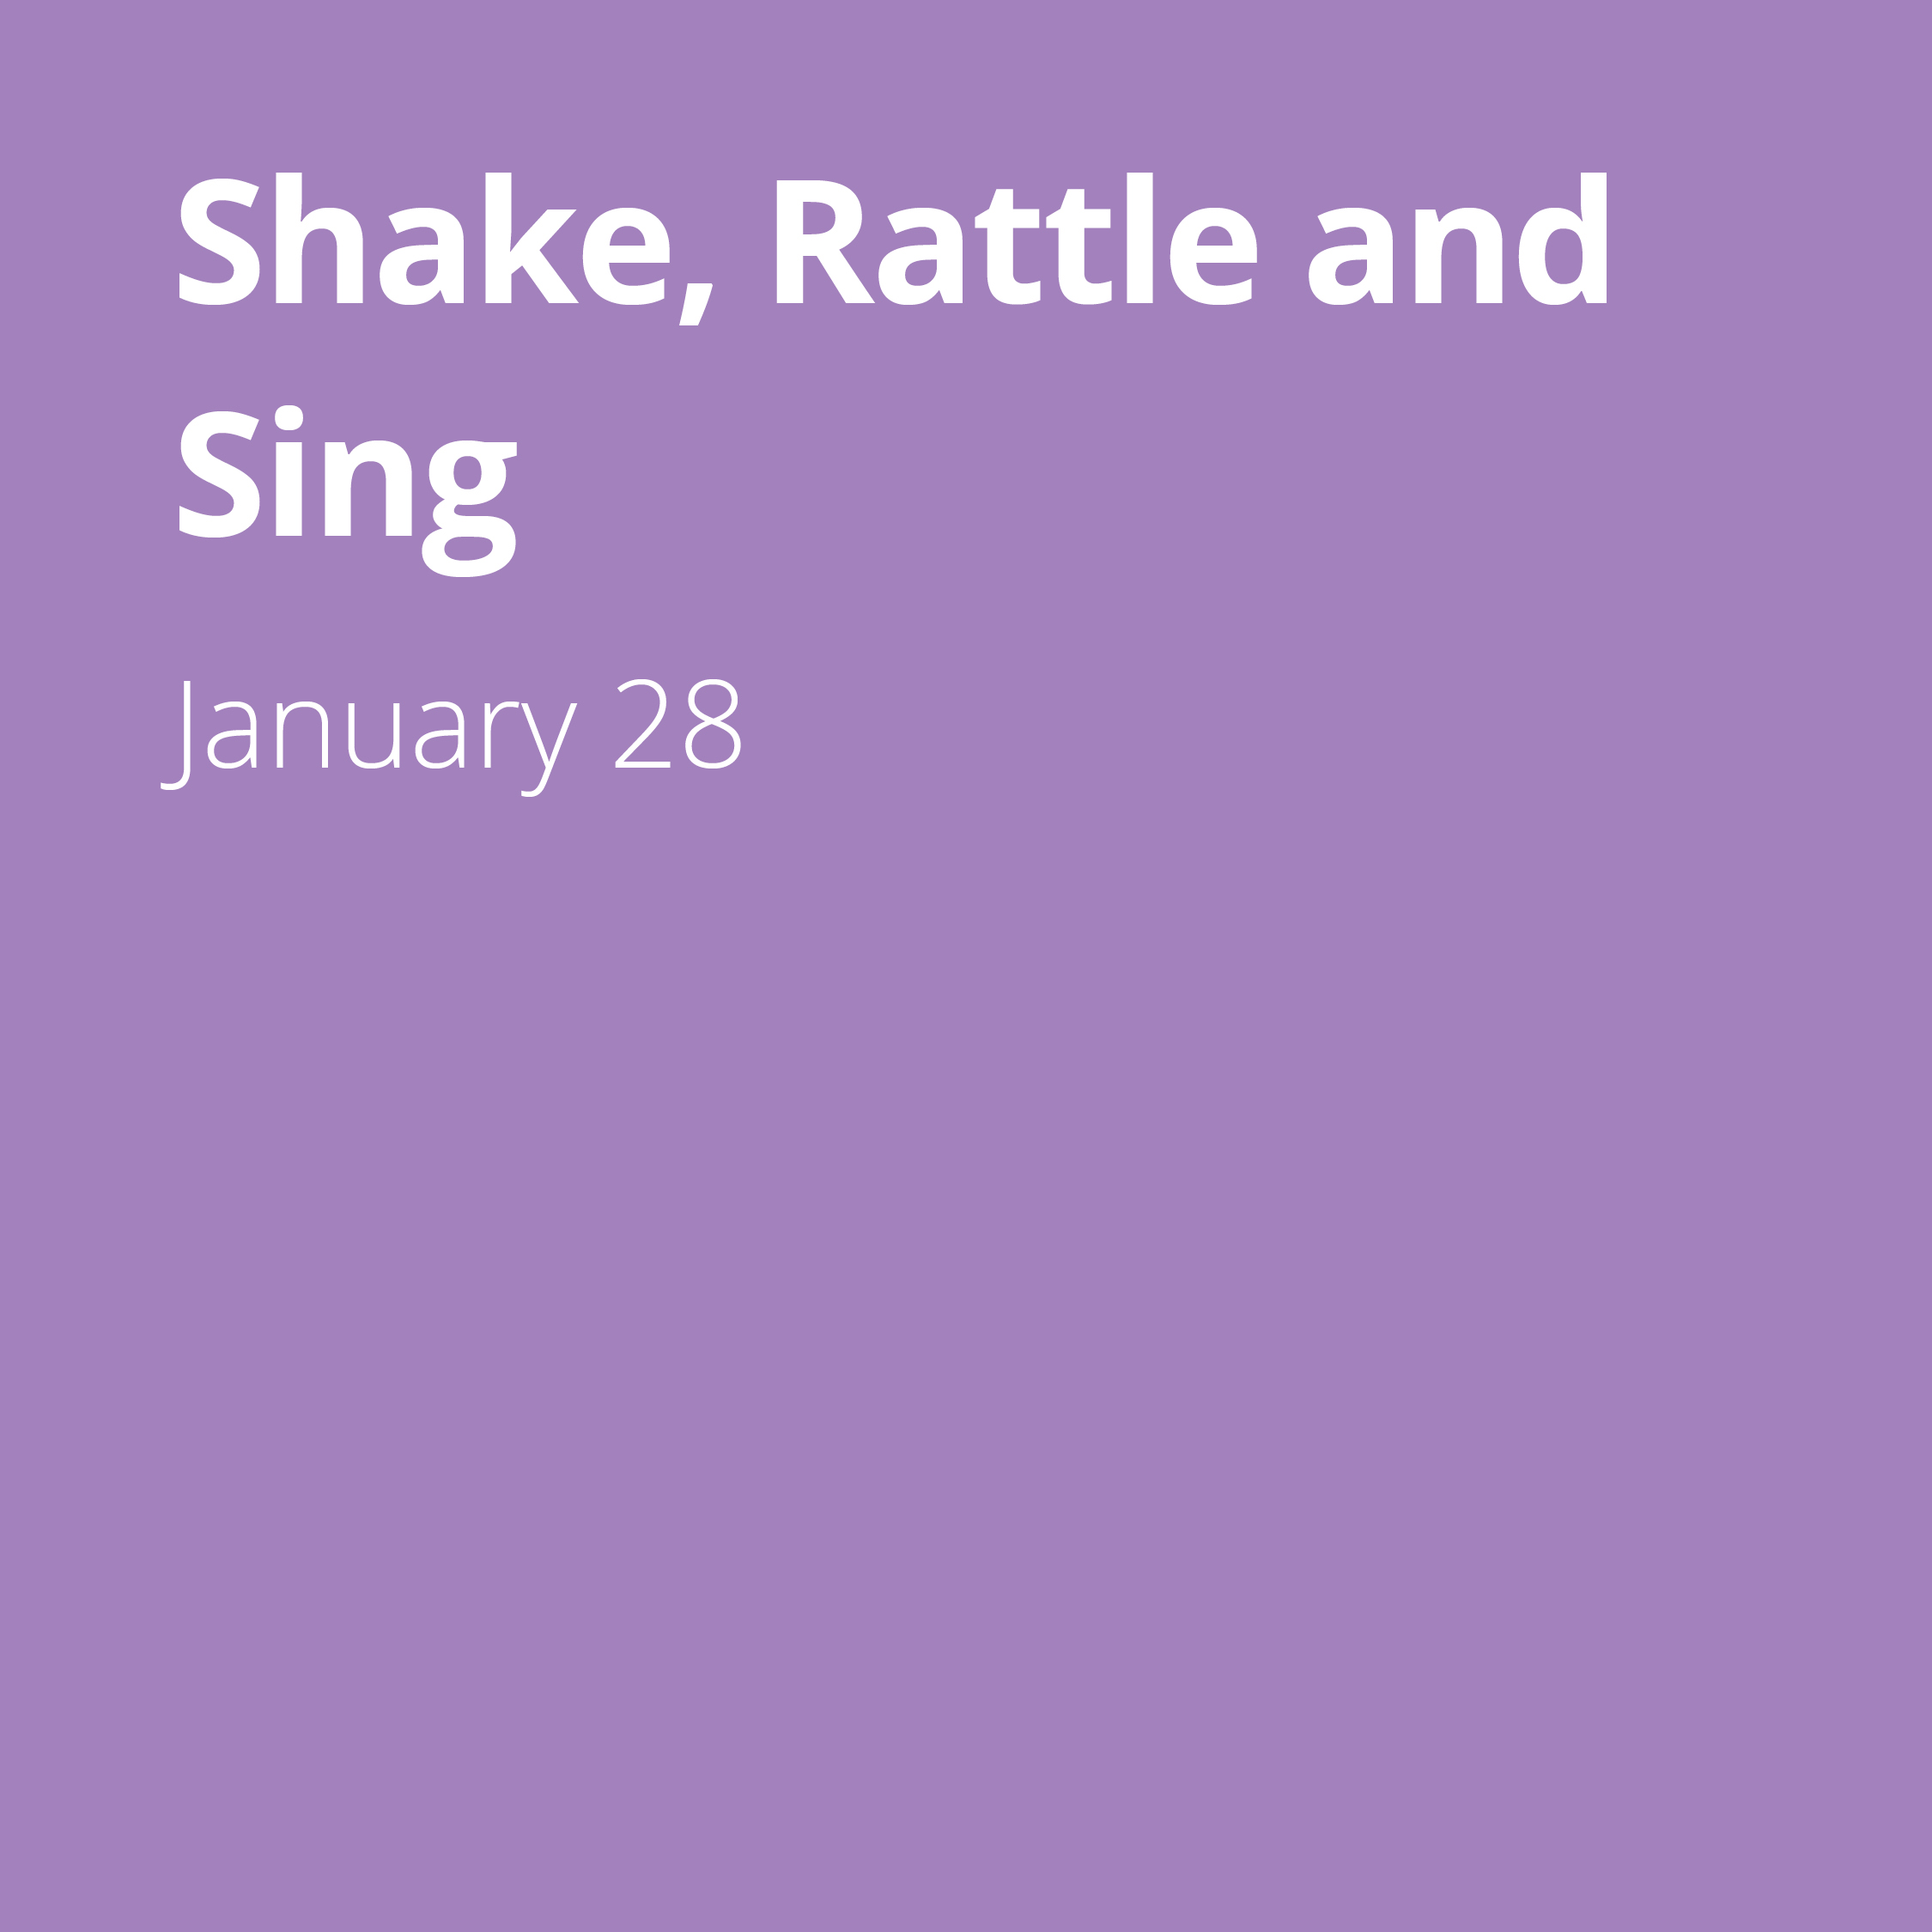 Shake, Rattle and Sing